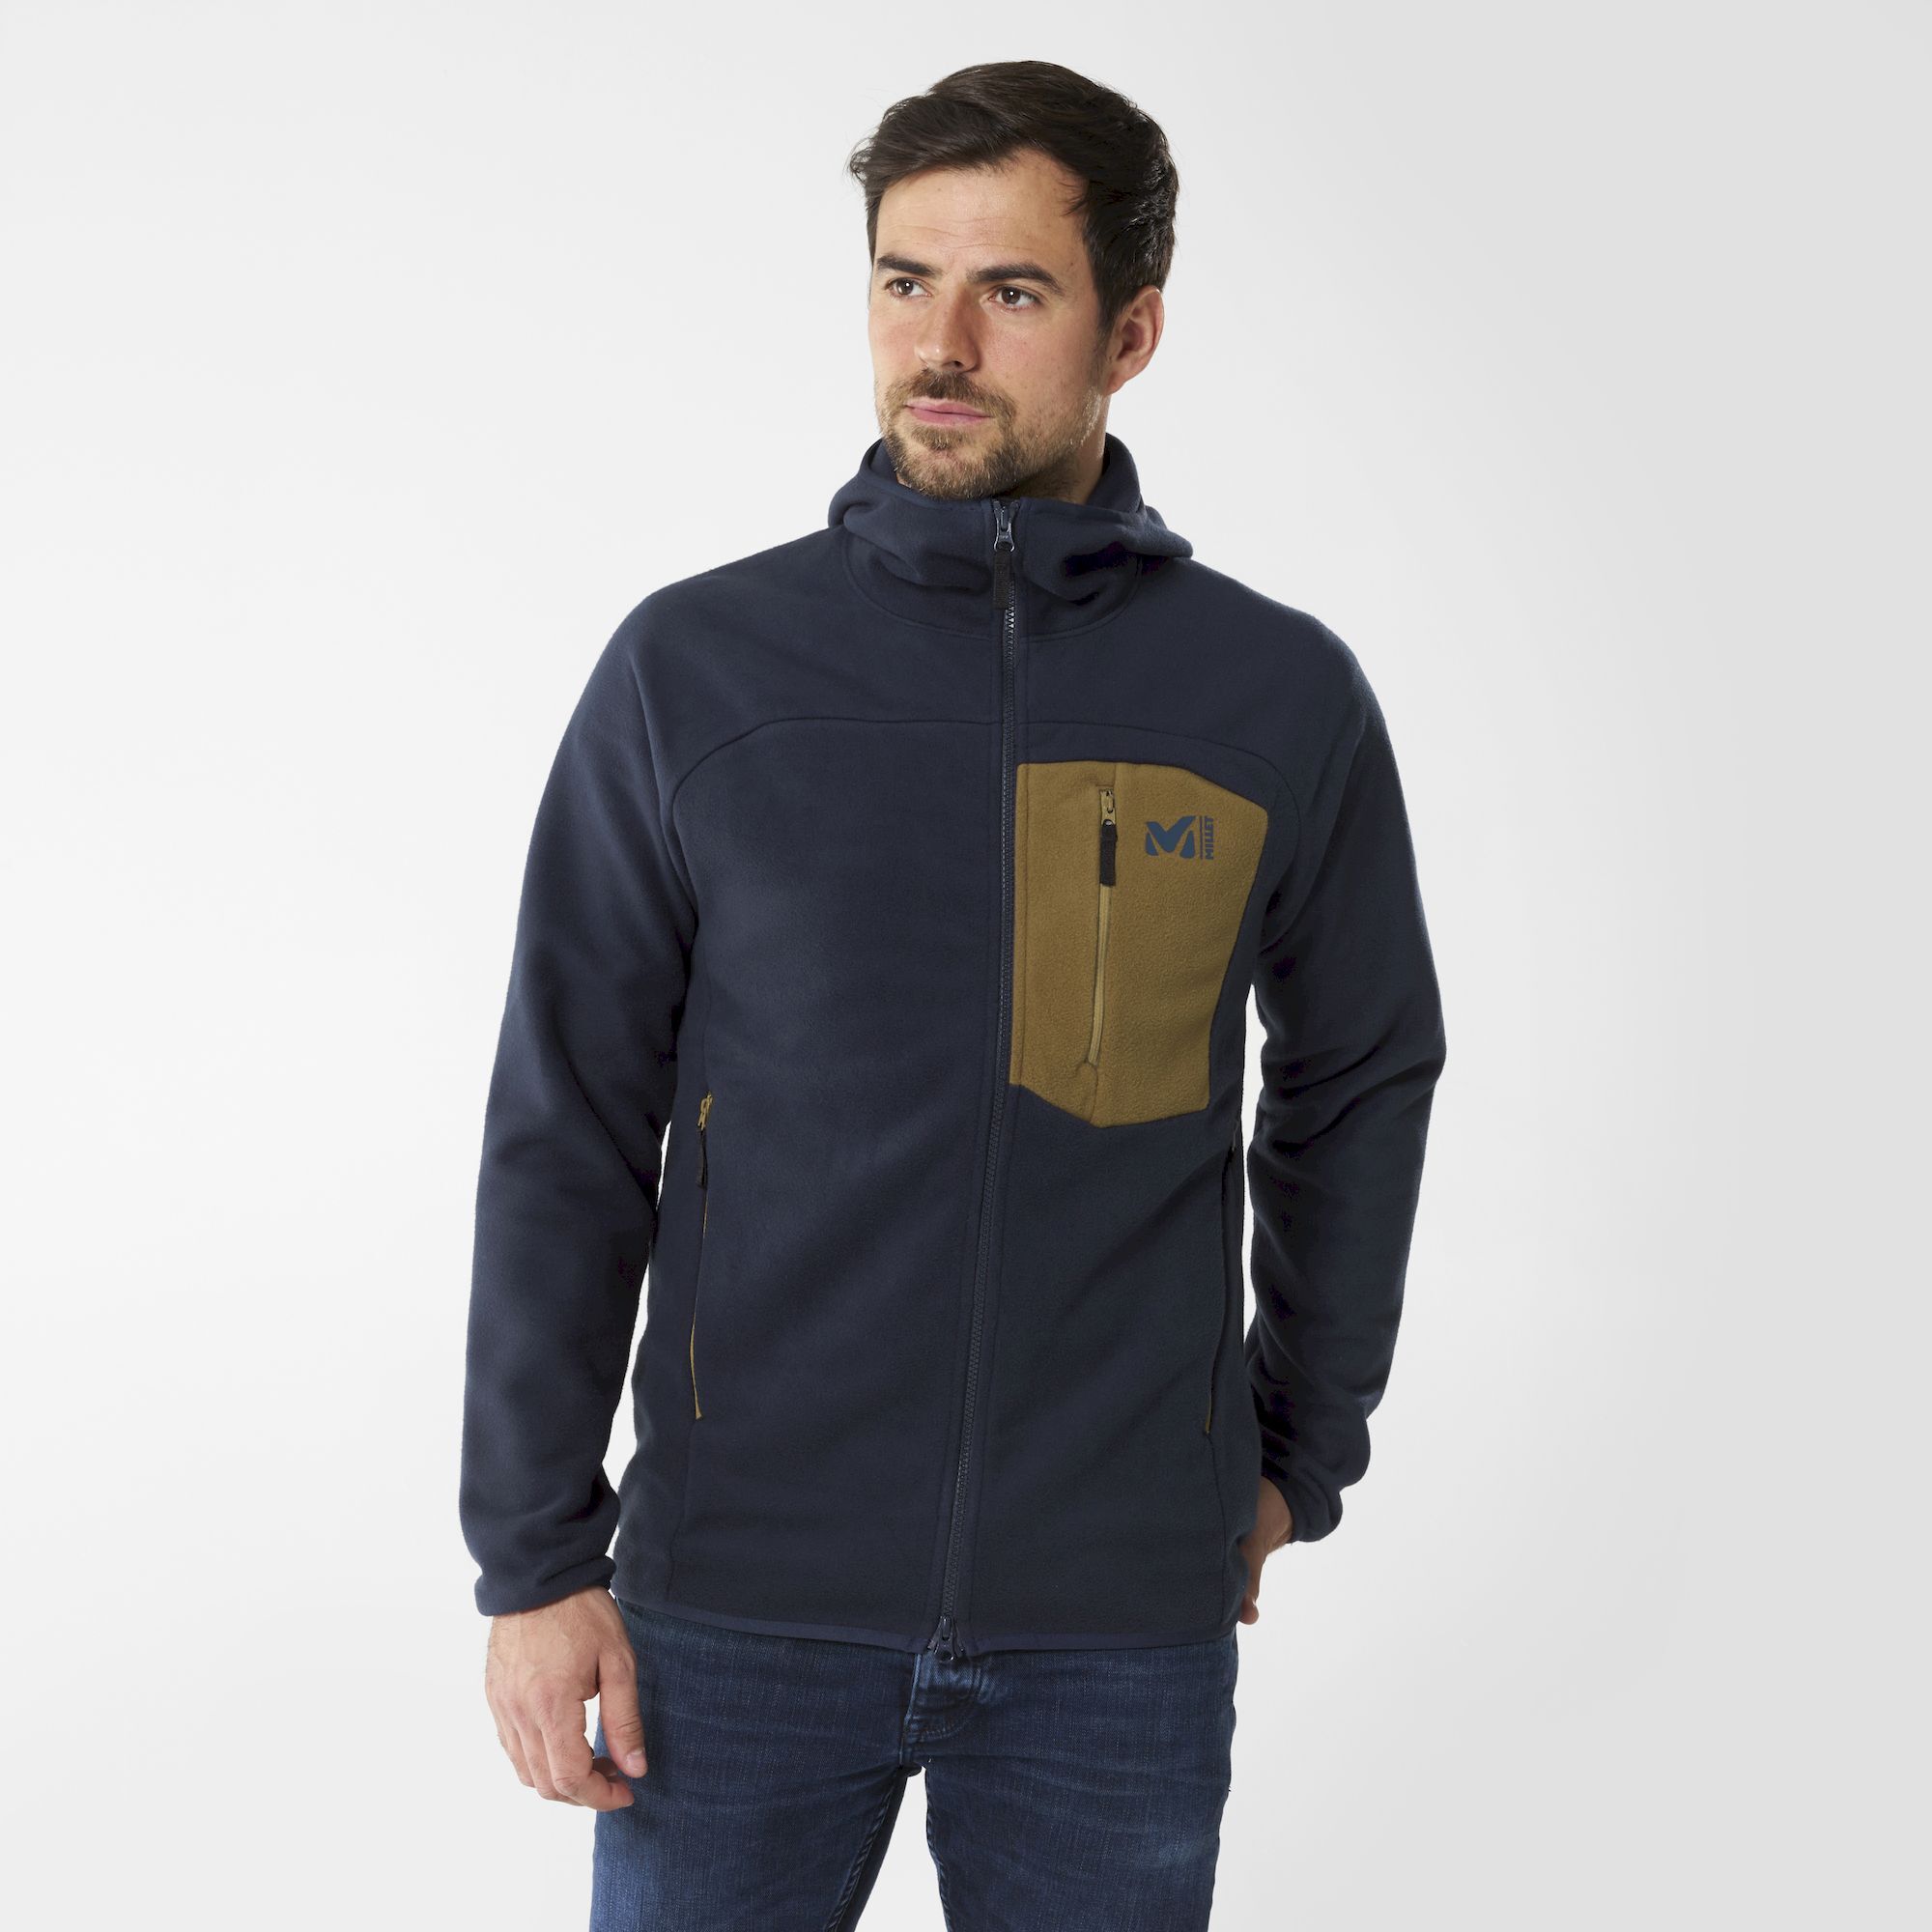 Millet Abrasion Fleece Hoodie - Polaire homme